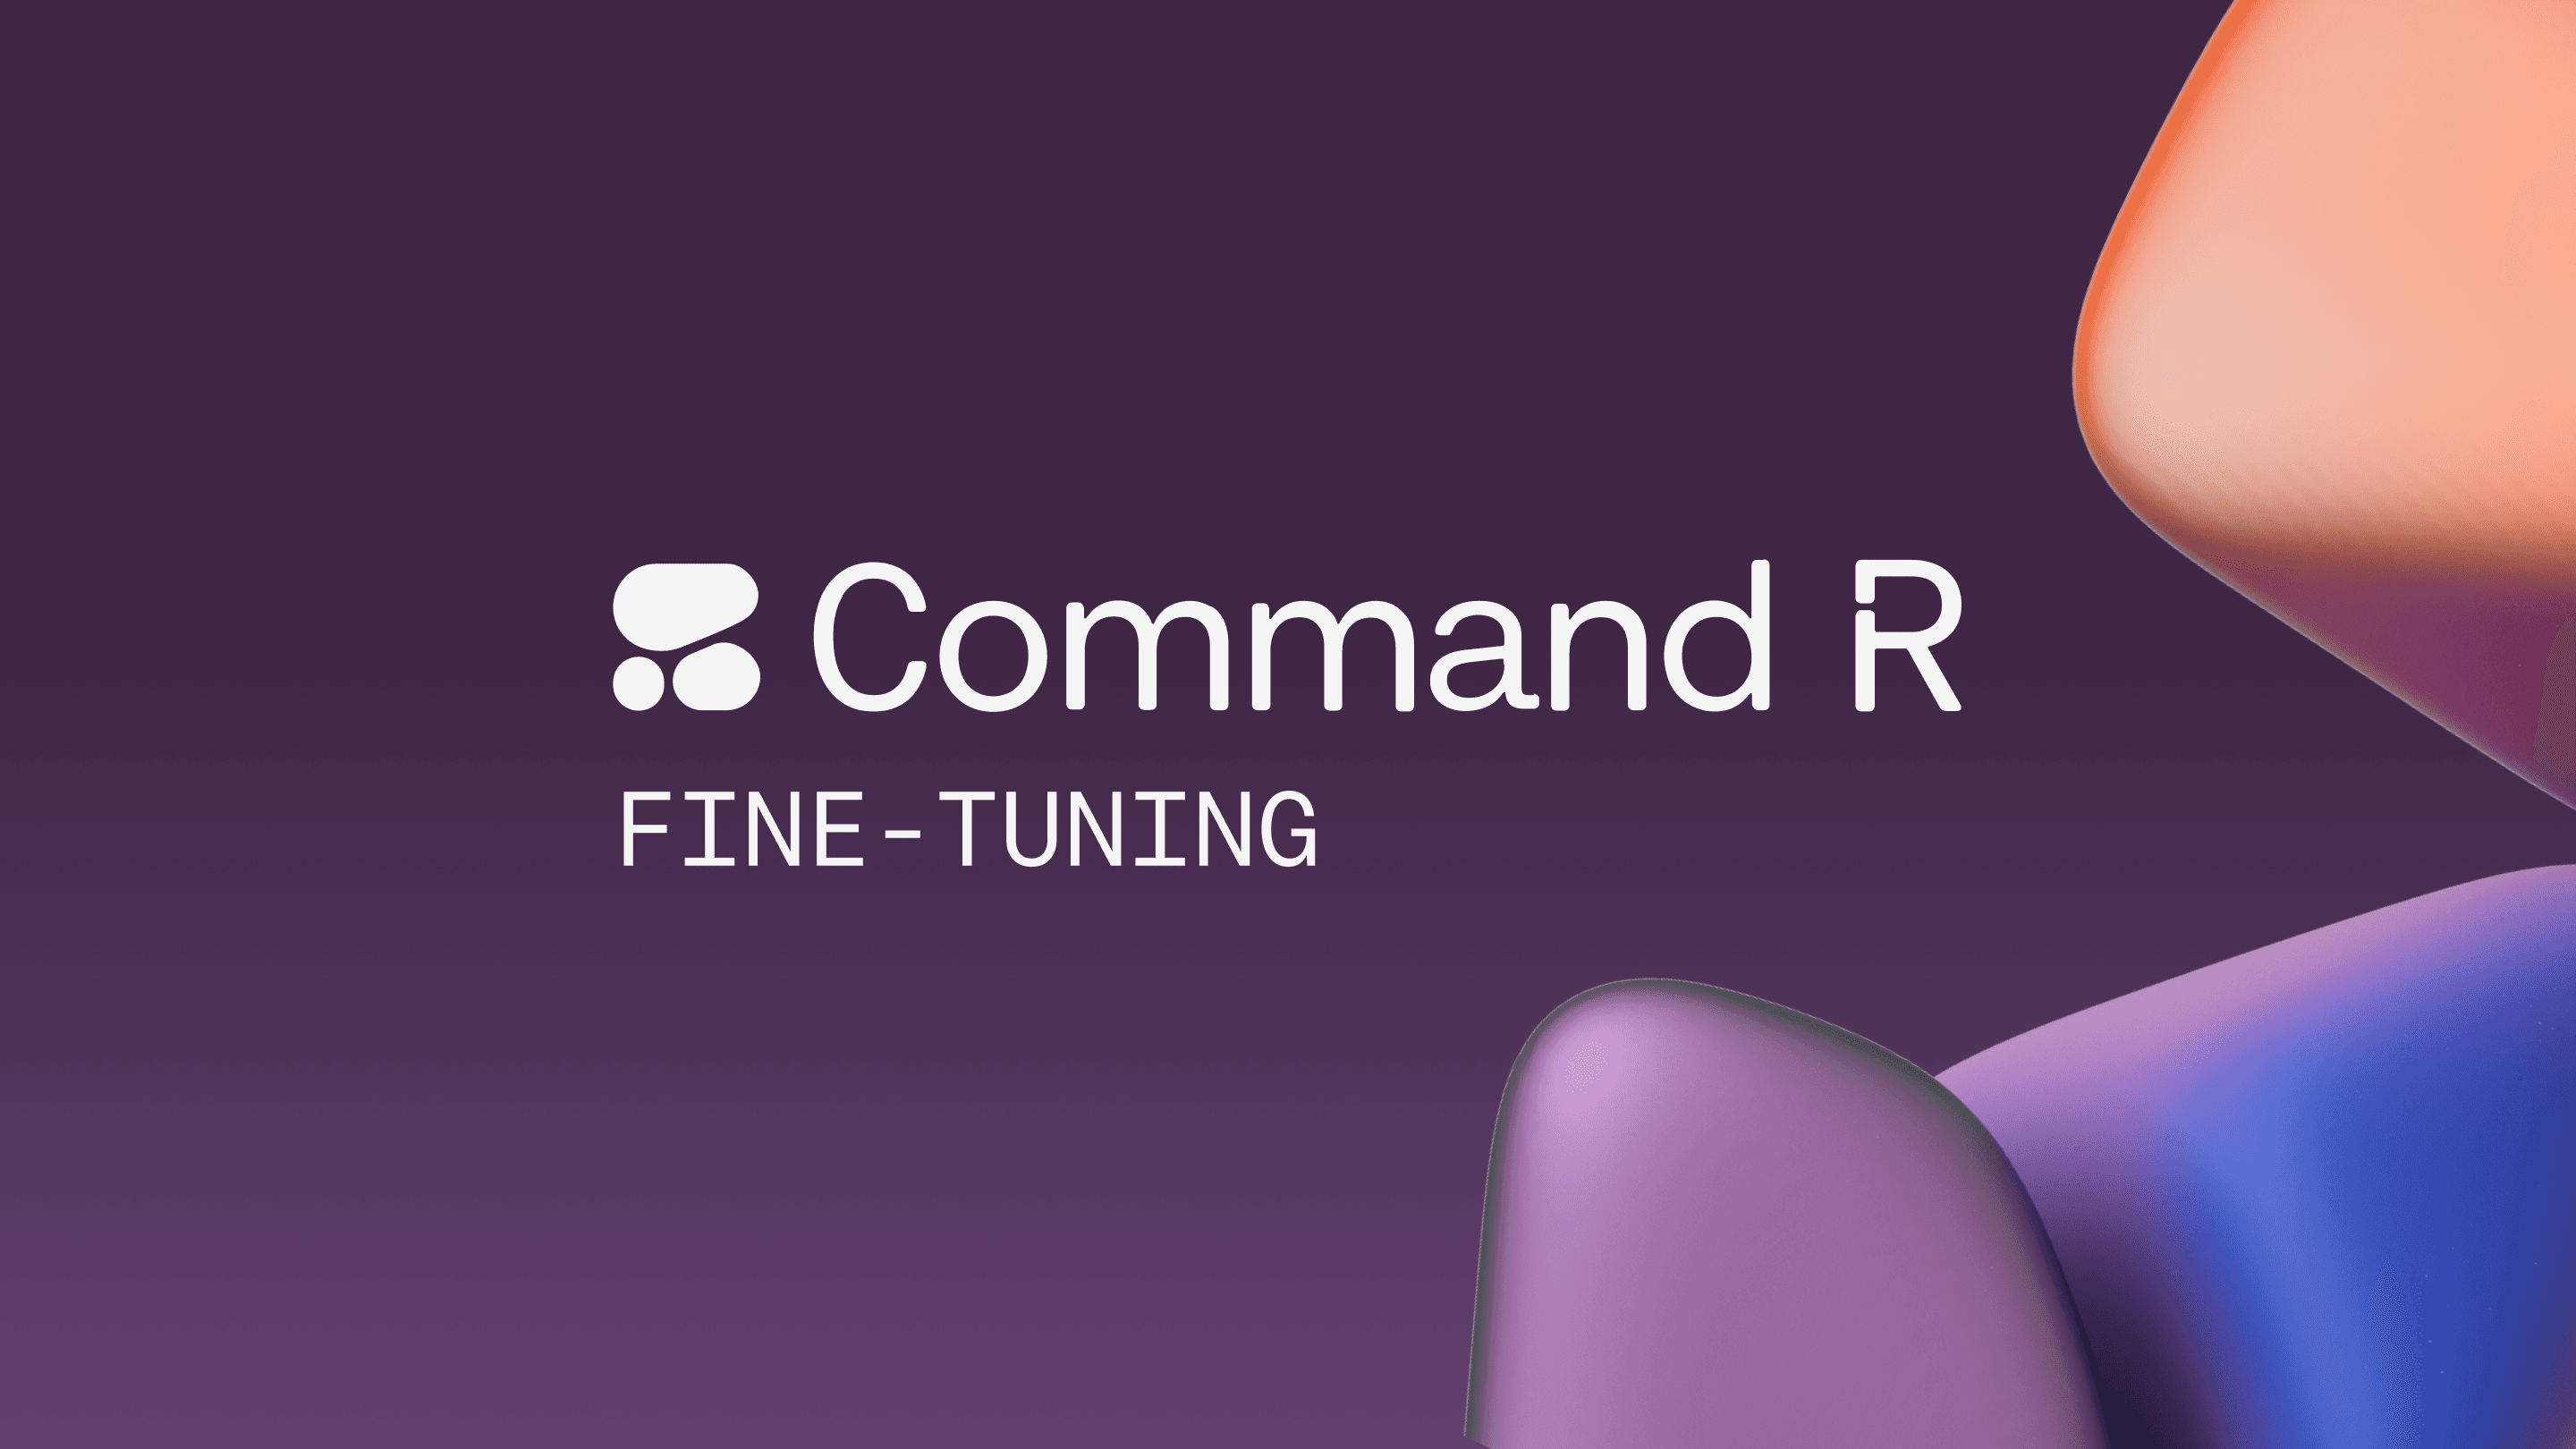 Introducing Command R Fine-Tuning: Industry-Leading Performance at a Fraction of the Cost